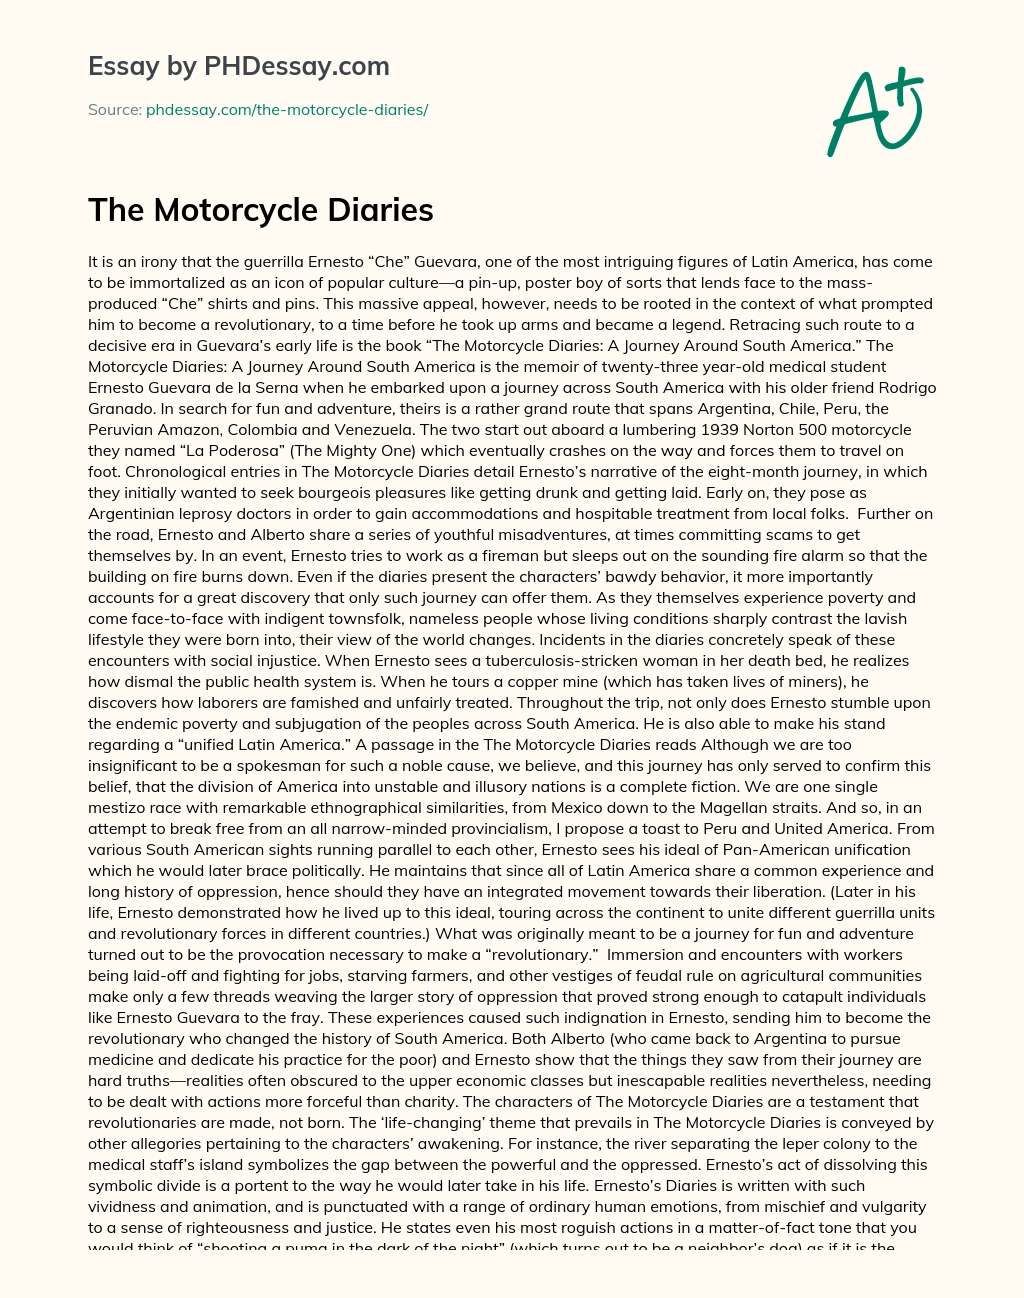 The Motorcycle Diaries essay